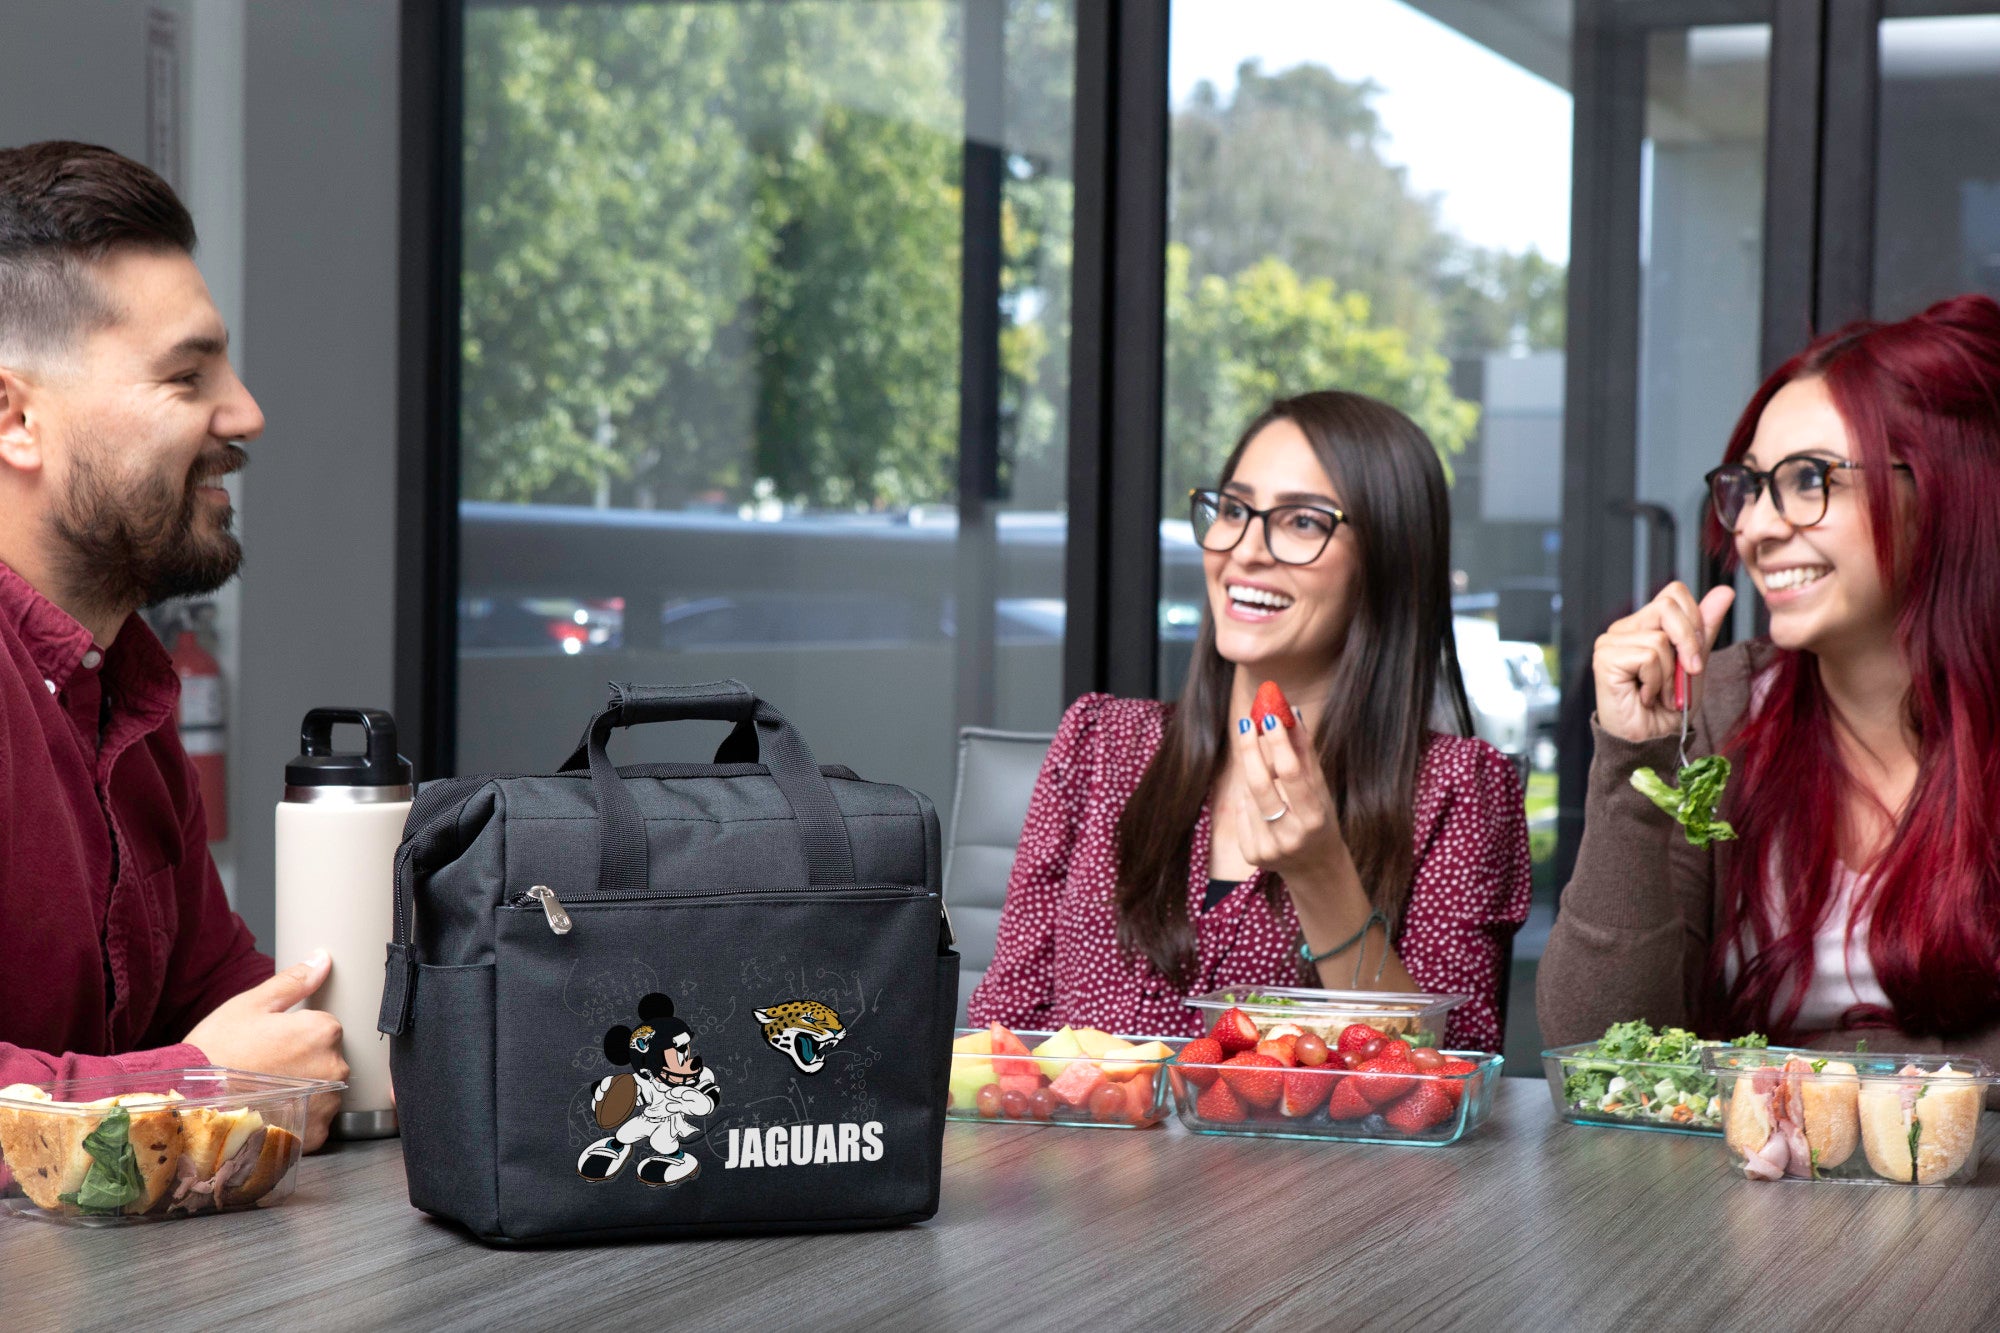 Jacksonville Jaguars Mickey Mouse - On The Go Lunch Bag Cooler